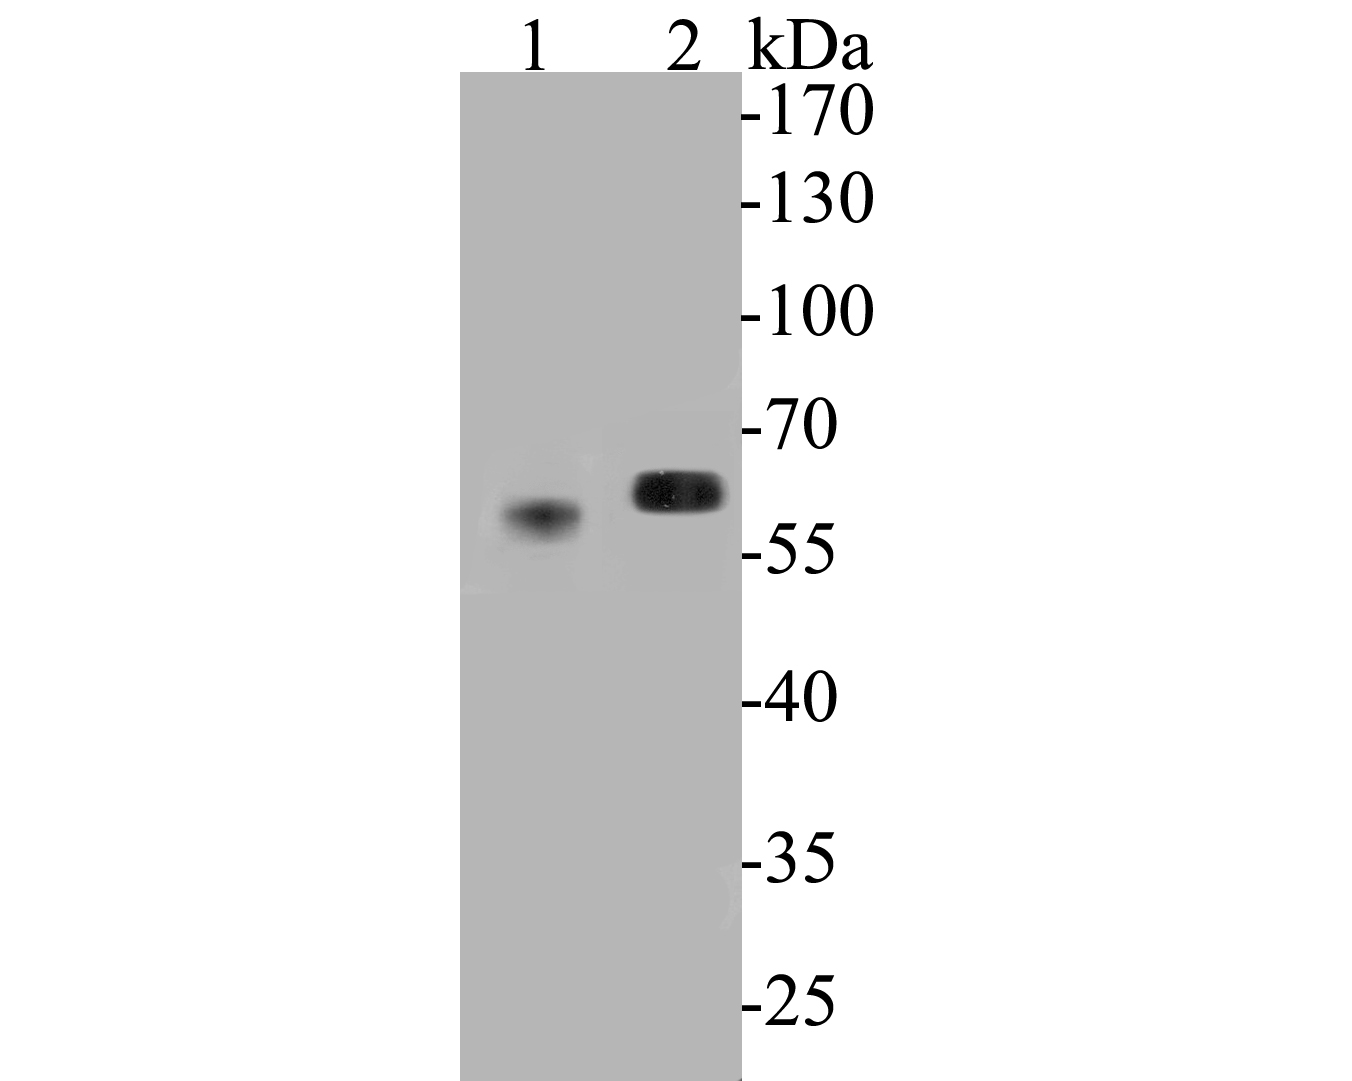 Western blot analysis of Syntrophin alpha 1 on different lysates. Proteins were transferred to a PVDF membrane and blocked with 5% BSA in PBS for 1 hour at room temperature. The primary antibody (ER1901-45, 1/500) was used in 5% BSA at room temperature for 2 hours. Goat Anti-Rabbit IgG - HRP Secondary Antibody (HA1001) at 1:5,000 dilution was used for 1 hour at room temperature.<br />
Positive control: <br />
Lane 1: mouse skeletal muscle tissue lysate<br />
Lane 2: rat skeletal muscle tissue lysate